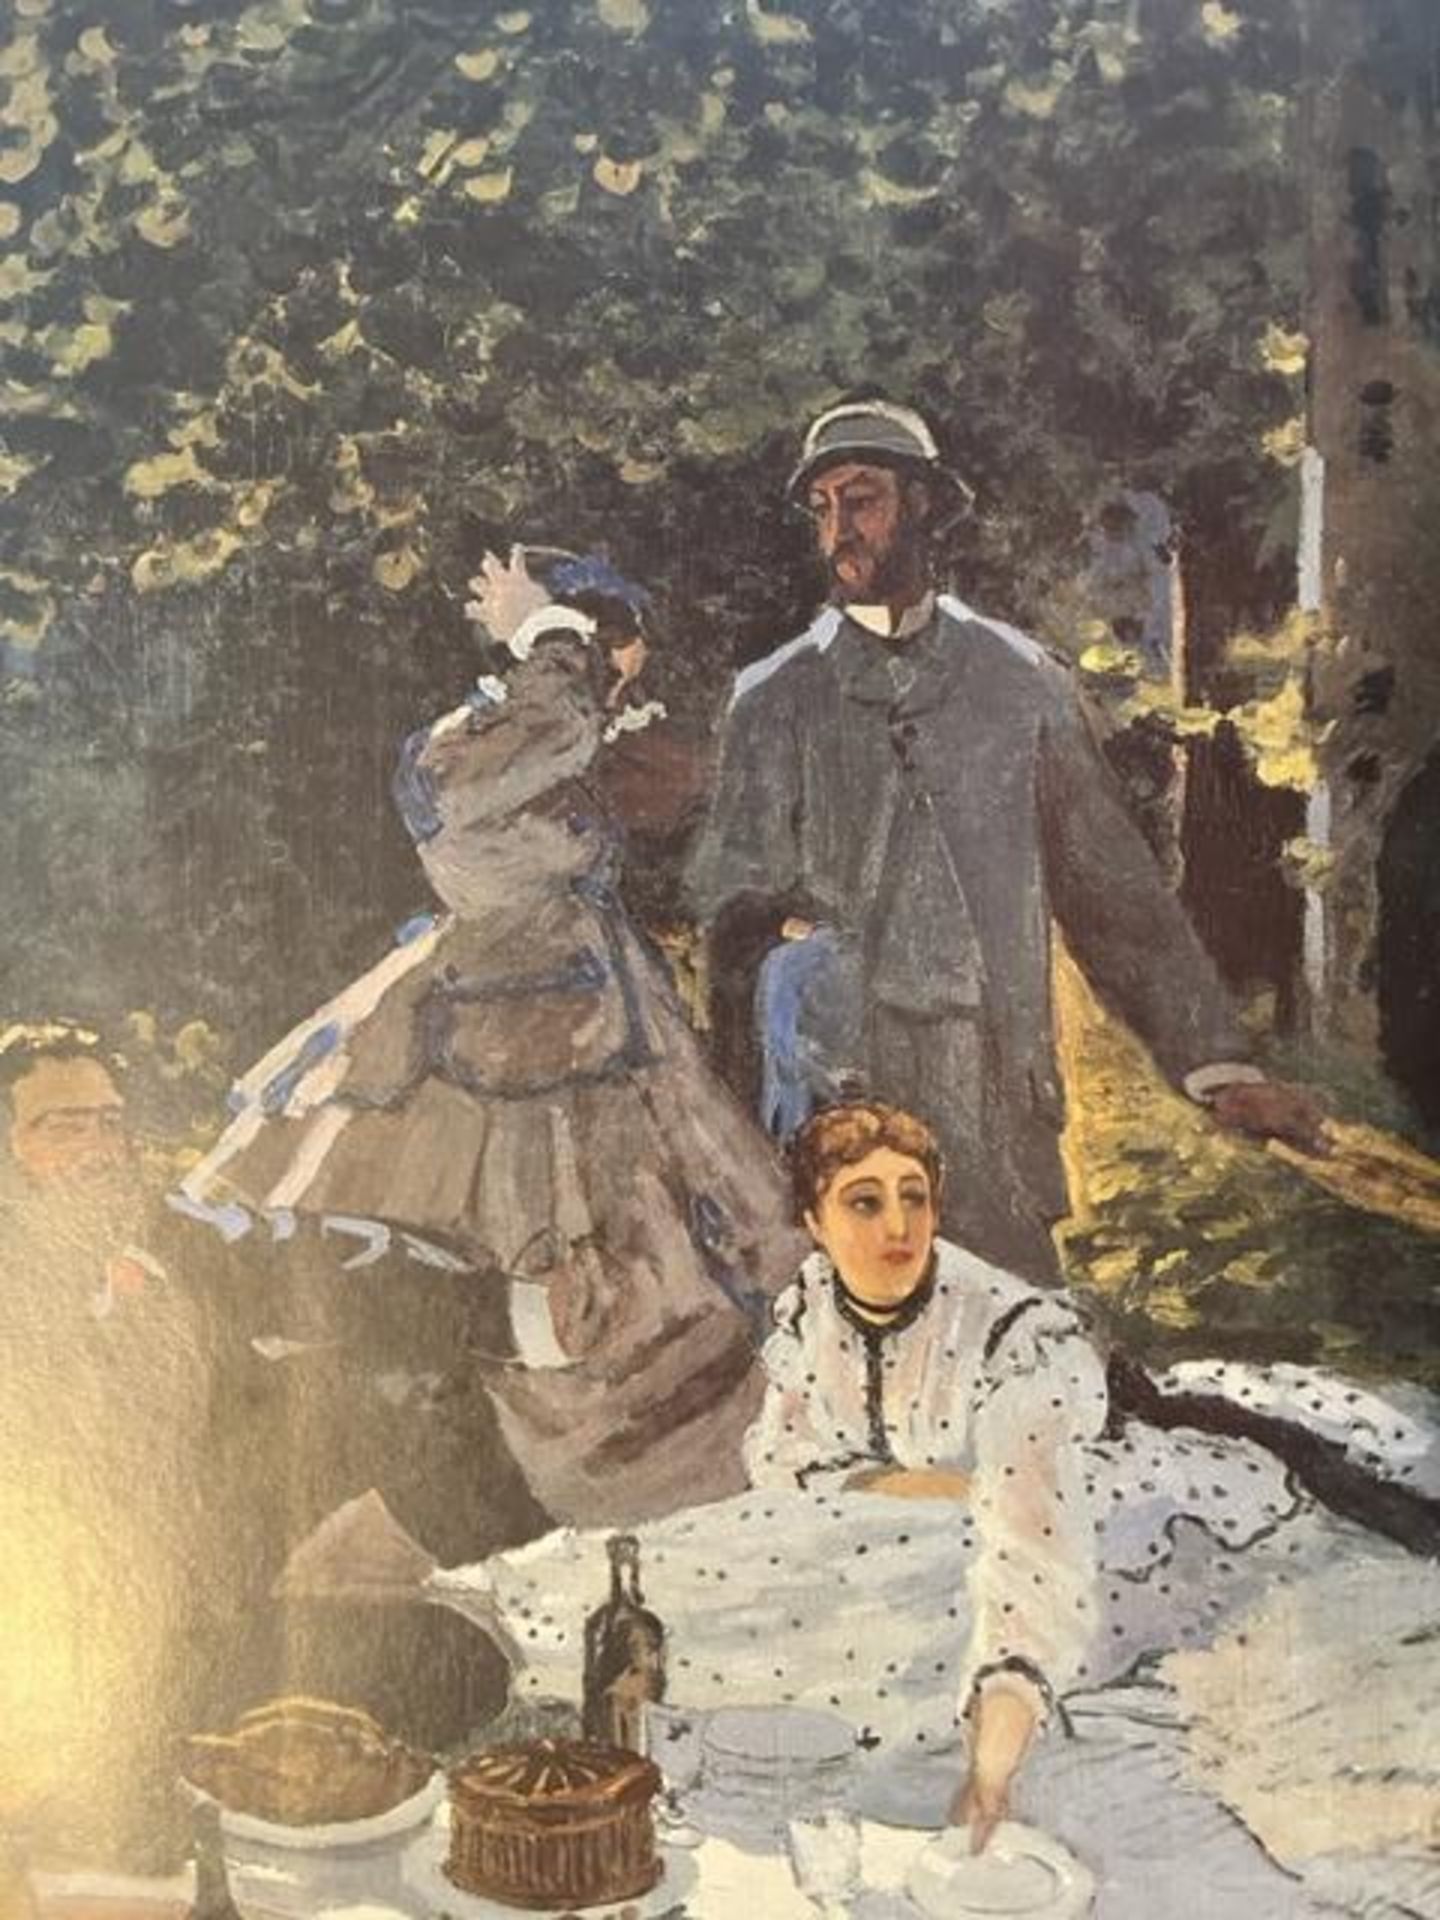 Claude Monet "Luncheon on the Grass" Print. - Image 3 of 3